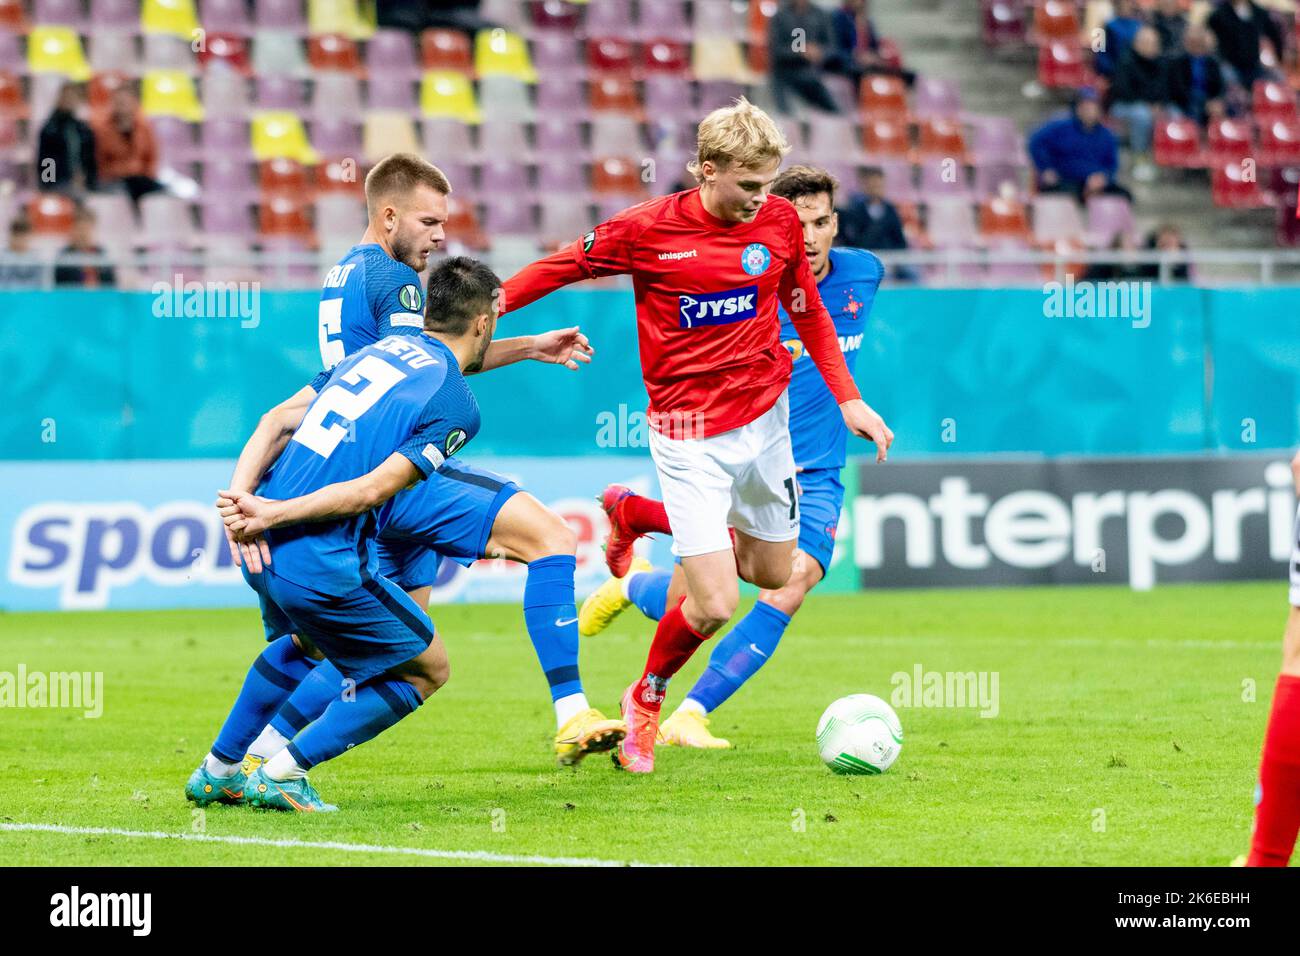 Bucharest, Romania. 14th Oct, 2022. October 14, 2022: Soren Tengstedt #10 of Silkeborg IF during of the UEFA Europa Conference League group B match between FCSB Bucharest and Silkeborg IF at National Arena Stadium in Bucharest, Romania ROU. Catalin Soare/Cronos Credit: Cronos/Alamy Live News Stock Photo